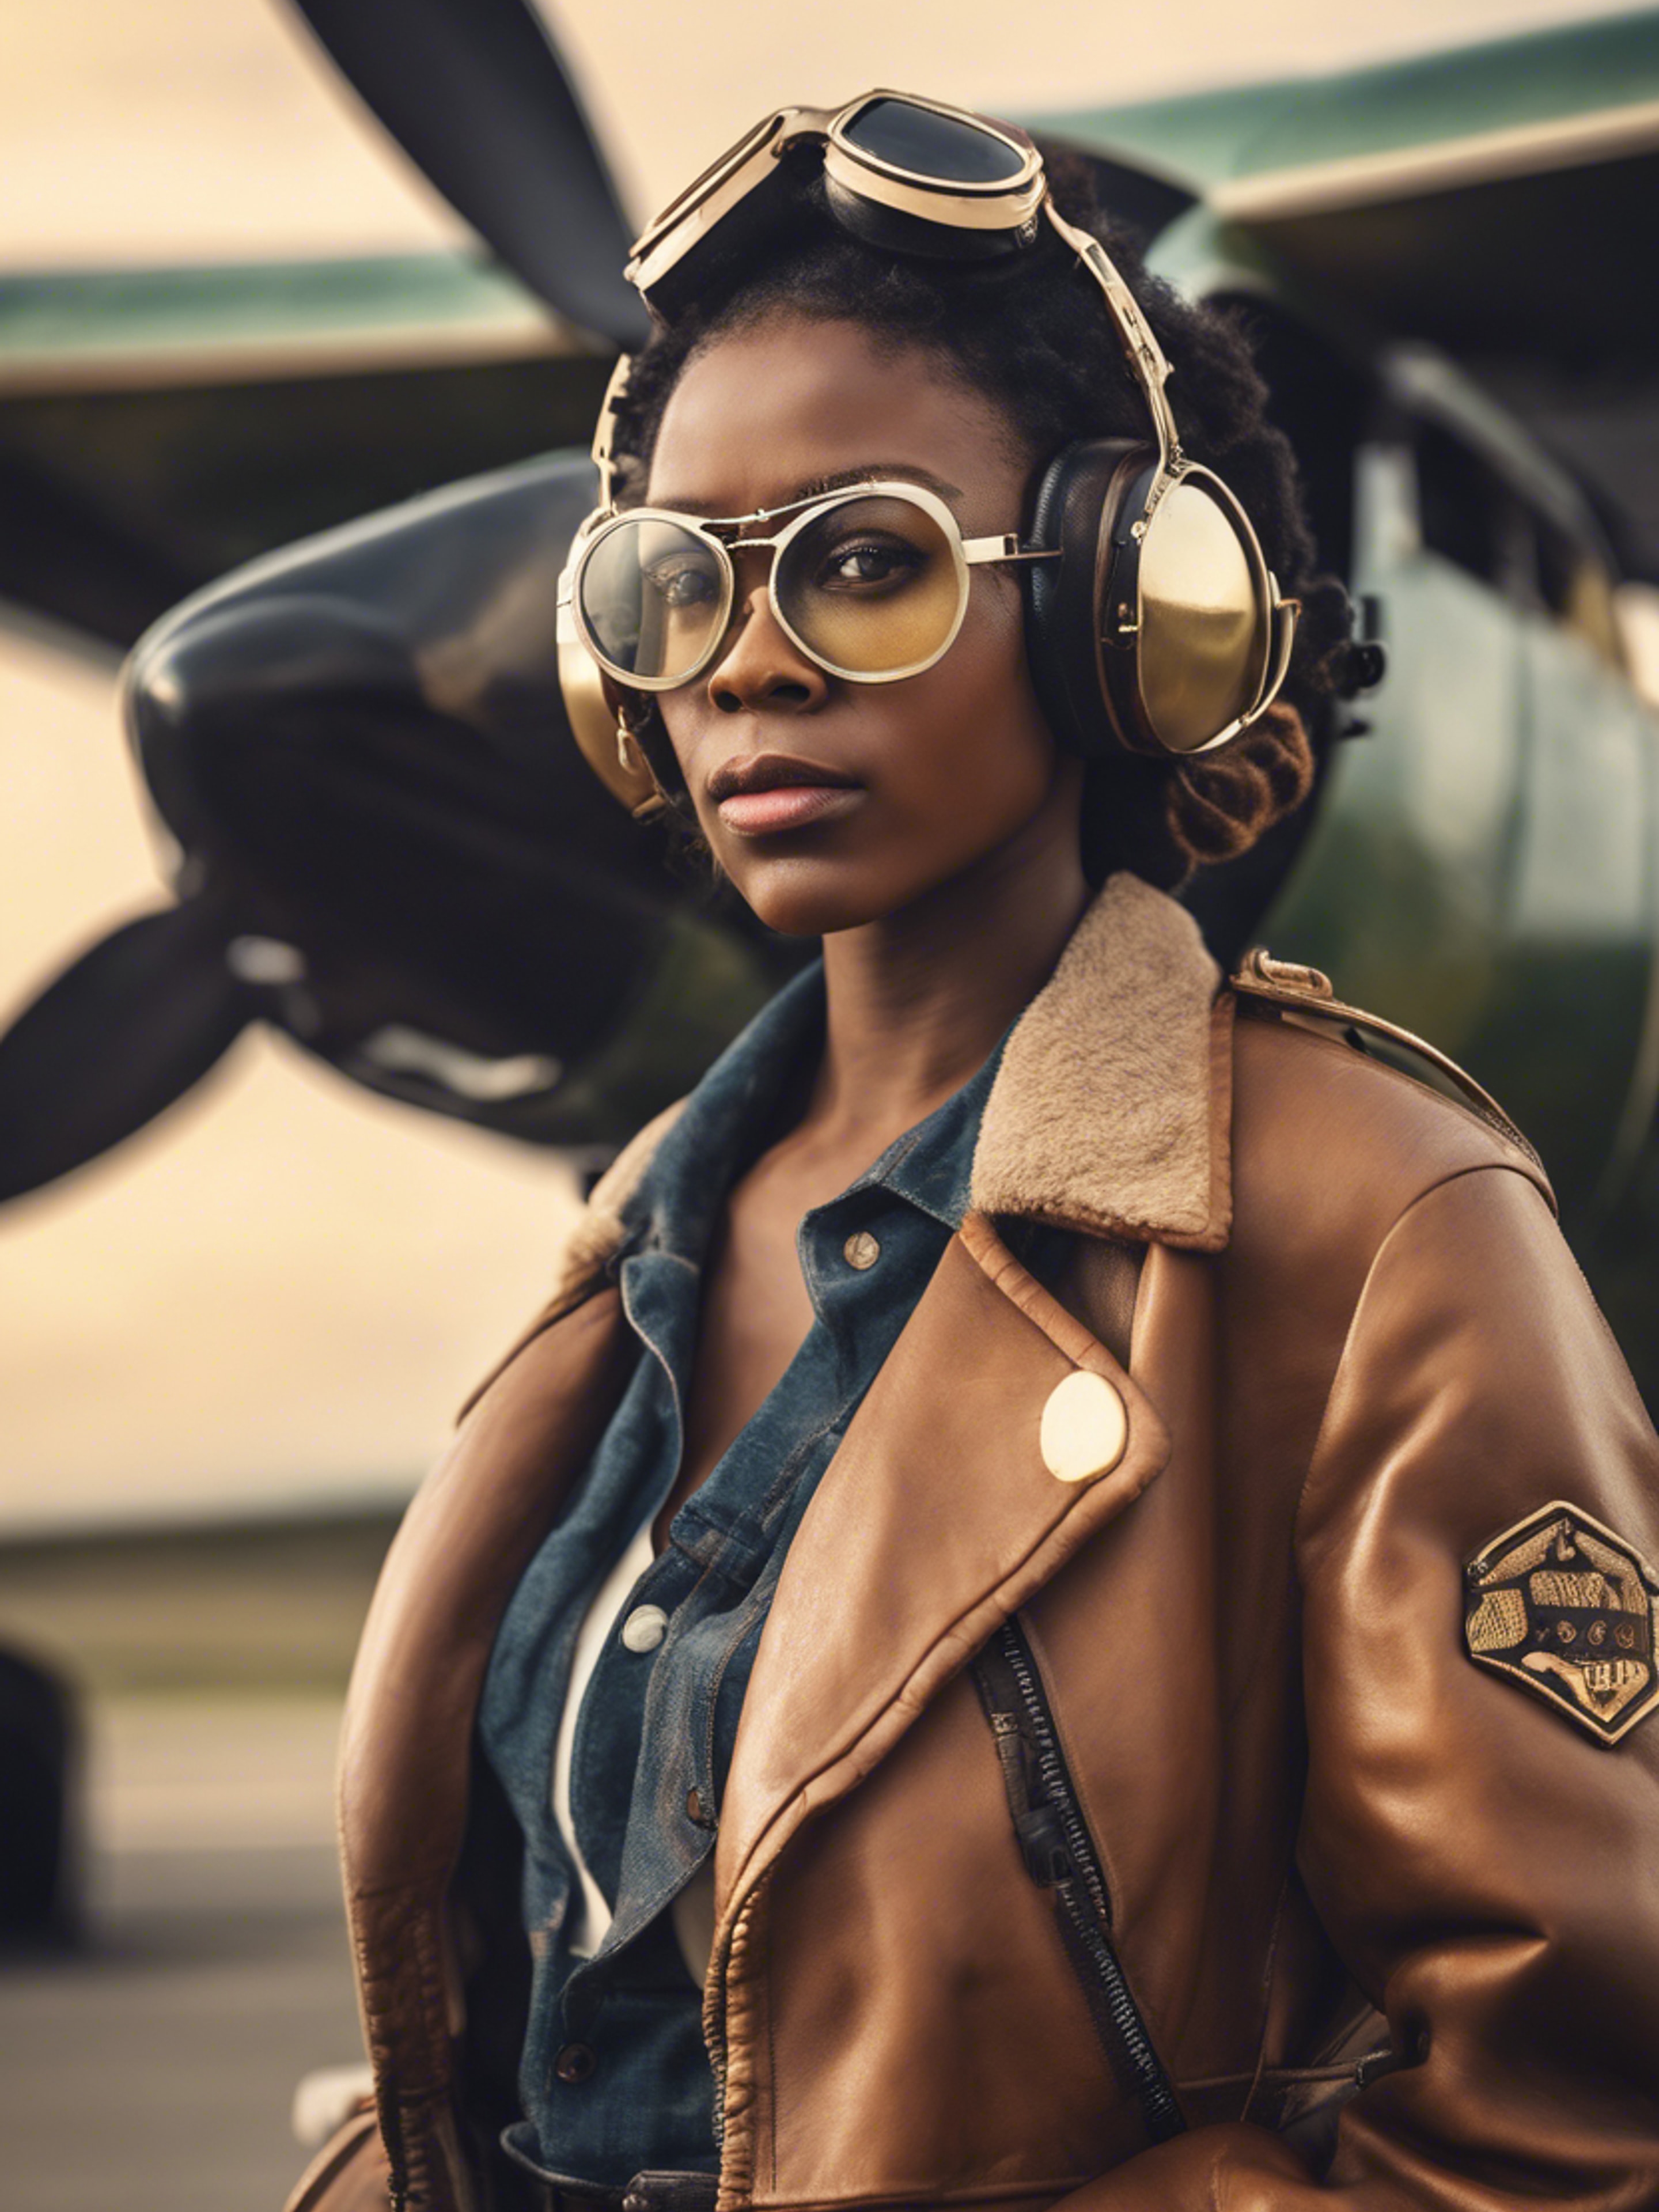 A black girl in an aviator jacket and goggles flying a retro propeller plane. Tapet[82958076c6f747e0ac9d]